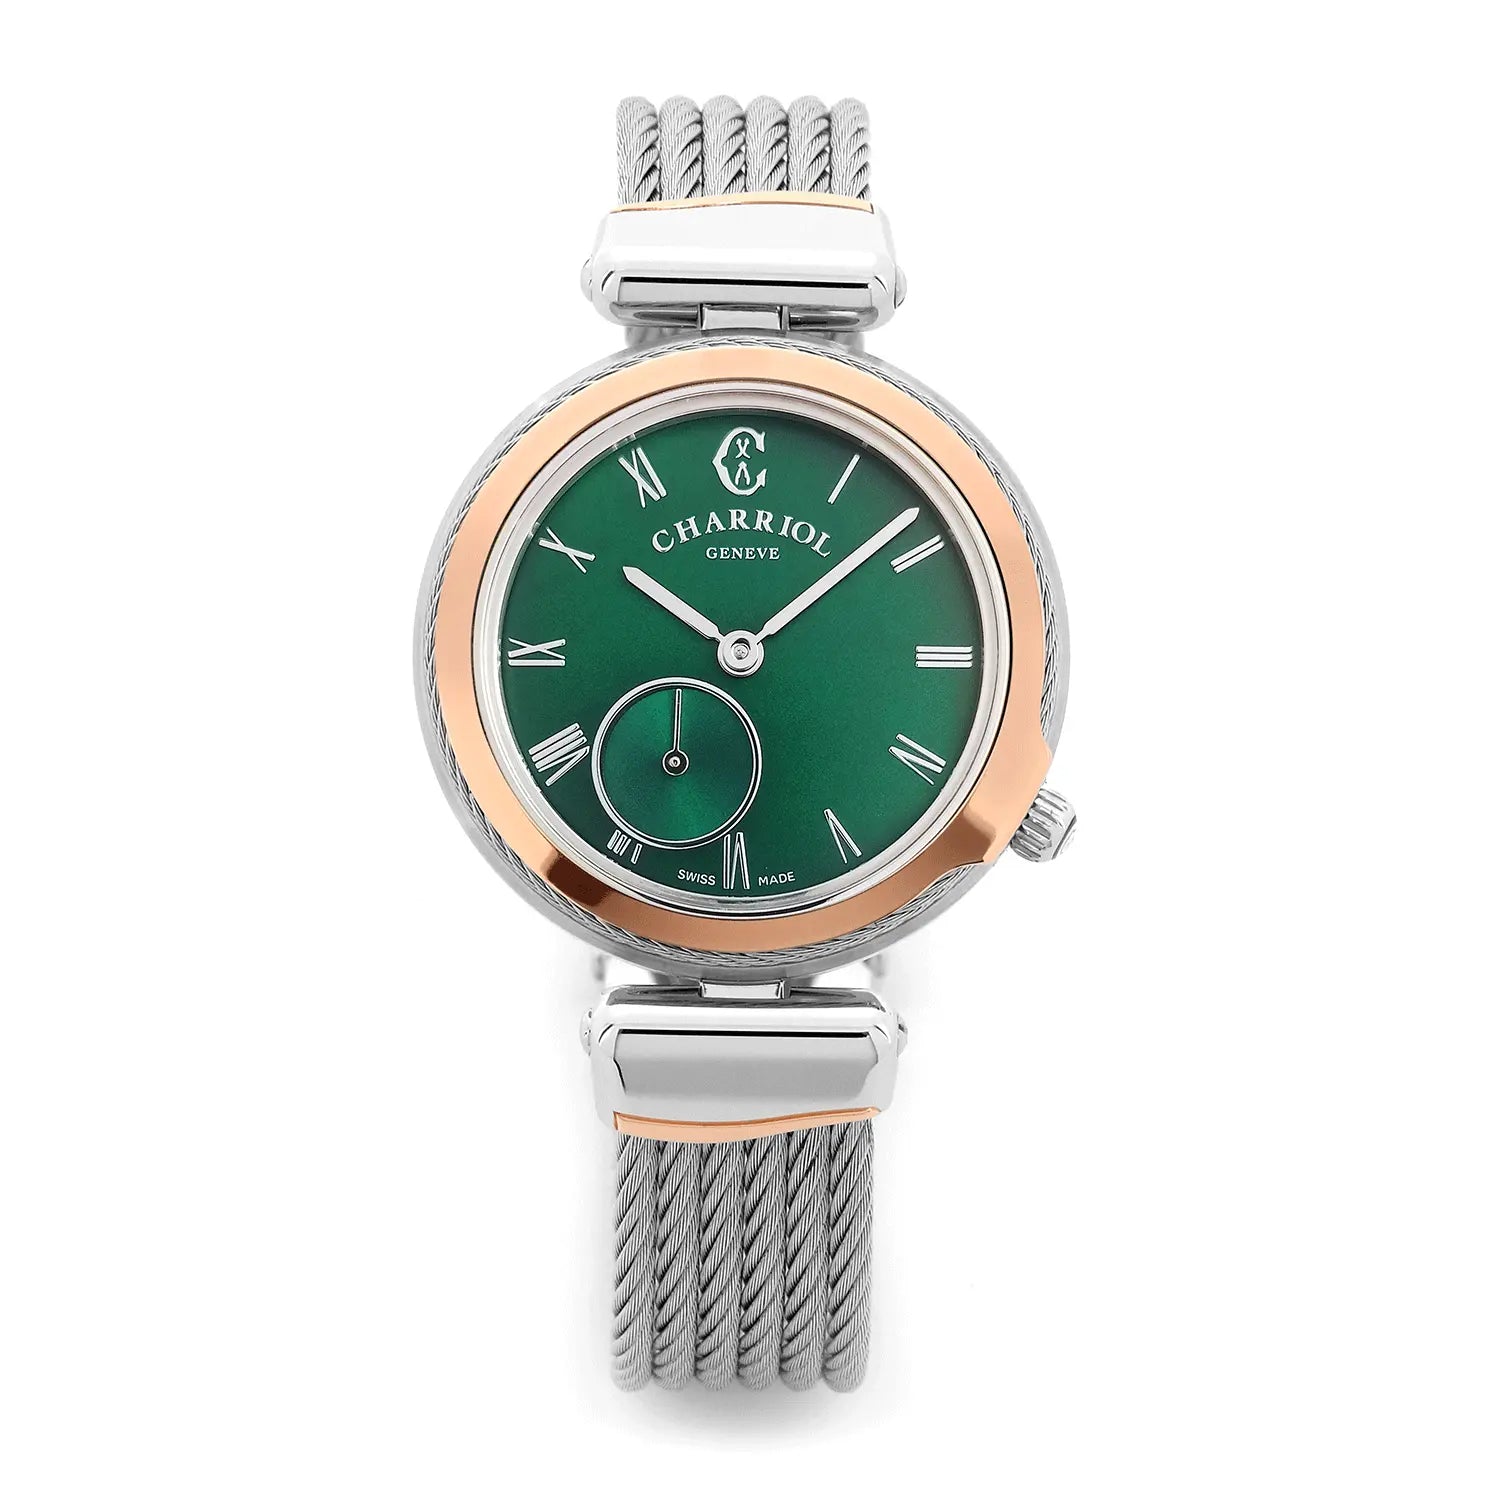 Celtic Legacy 30mm Light Grey Cable, Rose Gold PVD Bezel and Green Dial - Charriol Geneve -  Watch